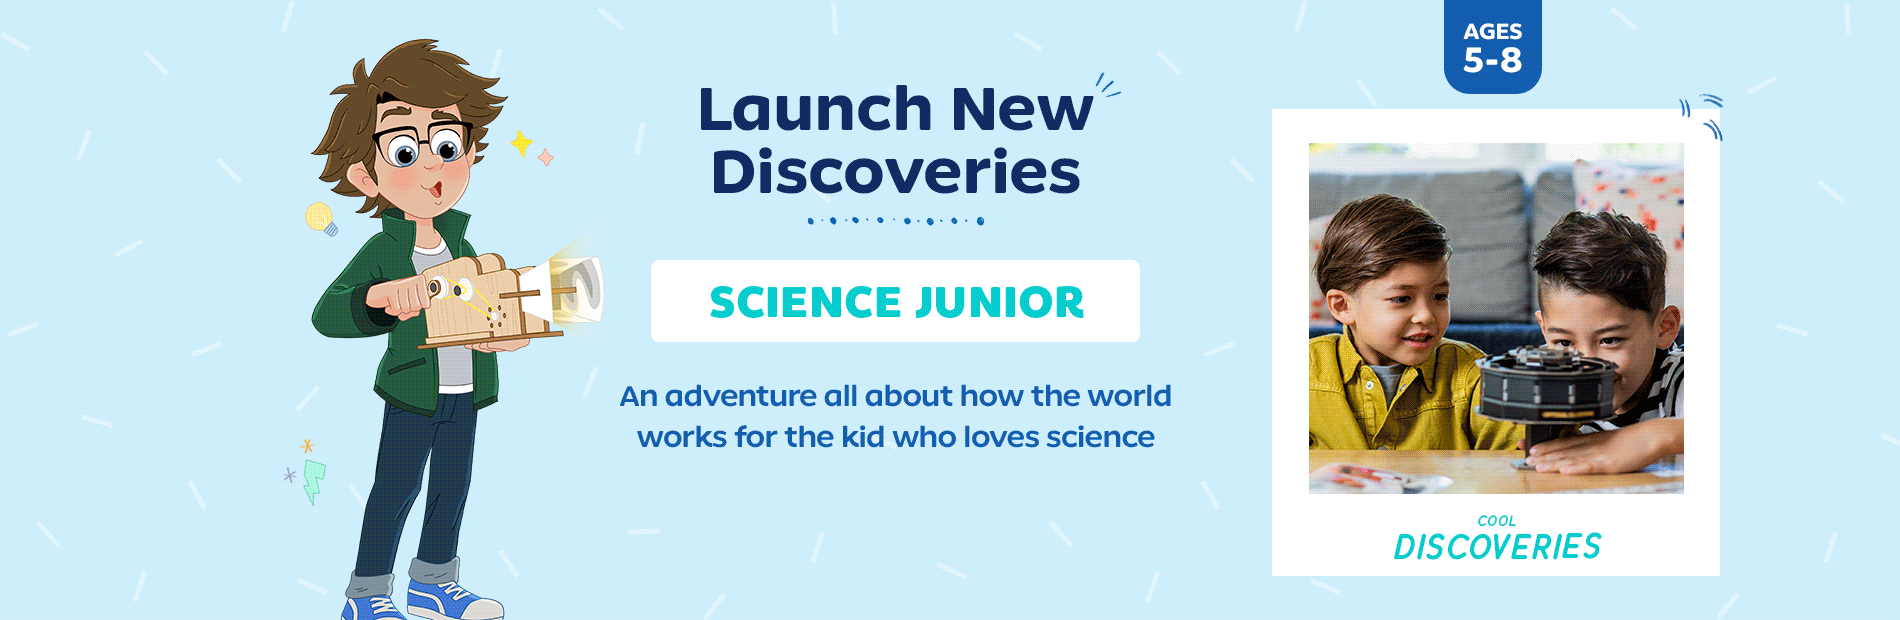 Launch New Discoveries SCIENCE JUNIOR An adventure all about how the world works for the kid who loves science